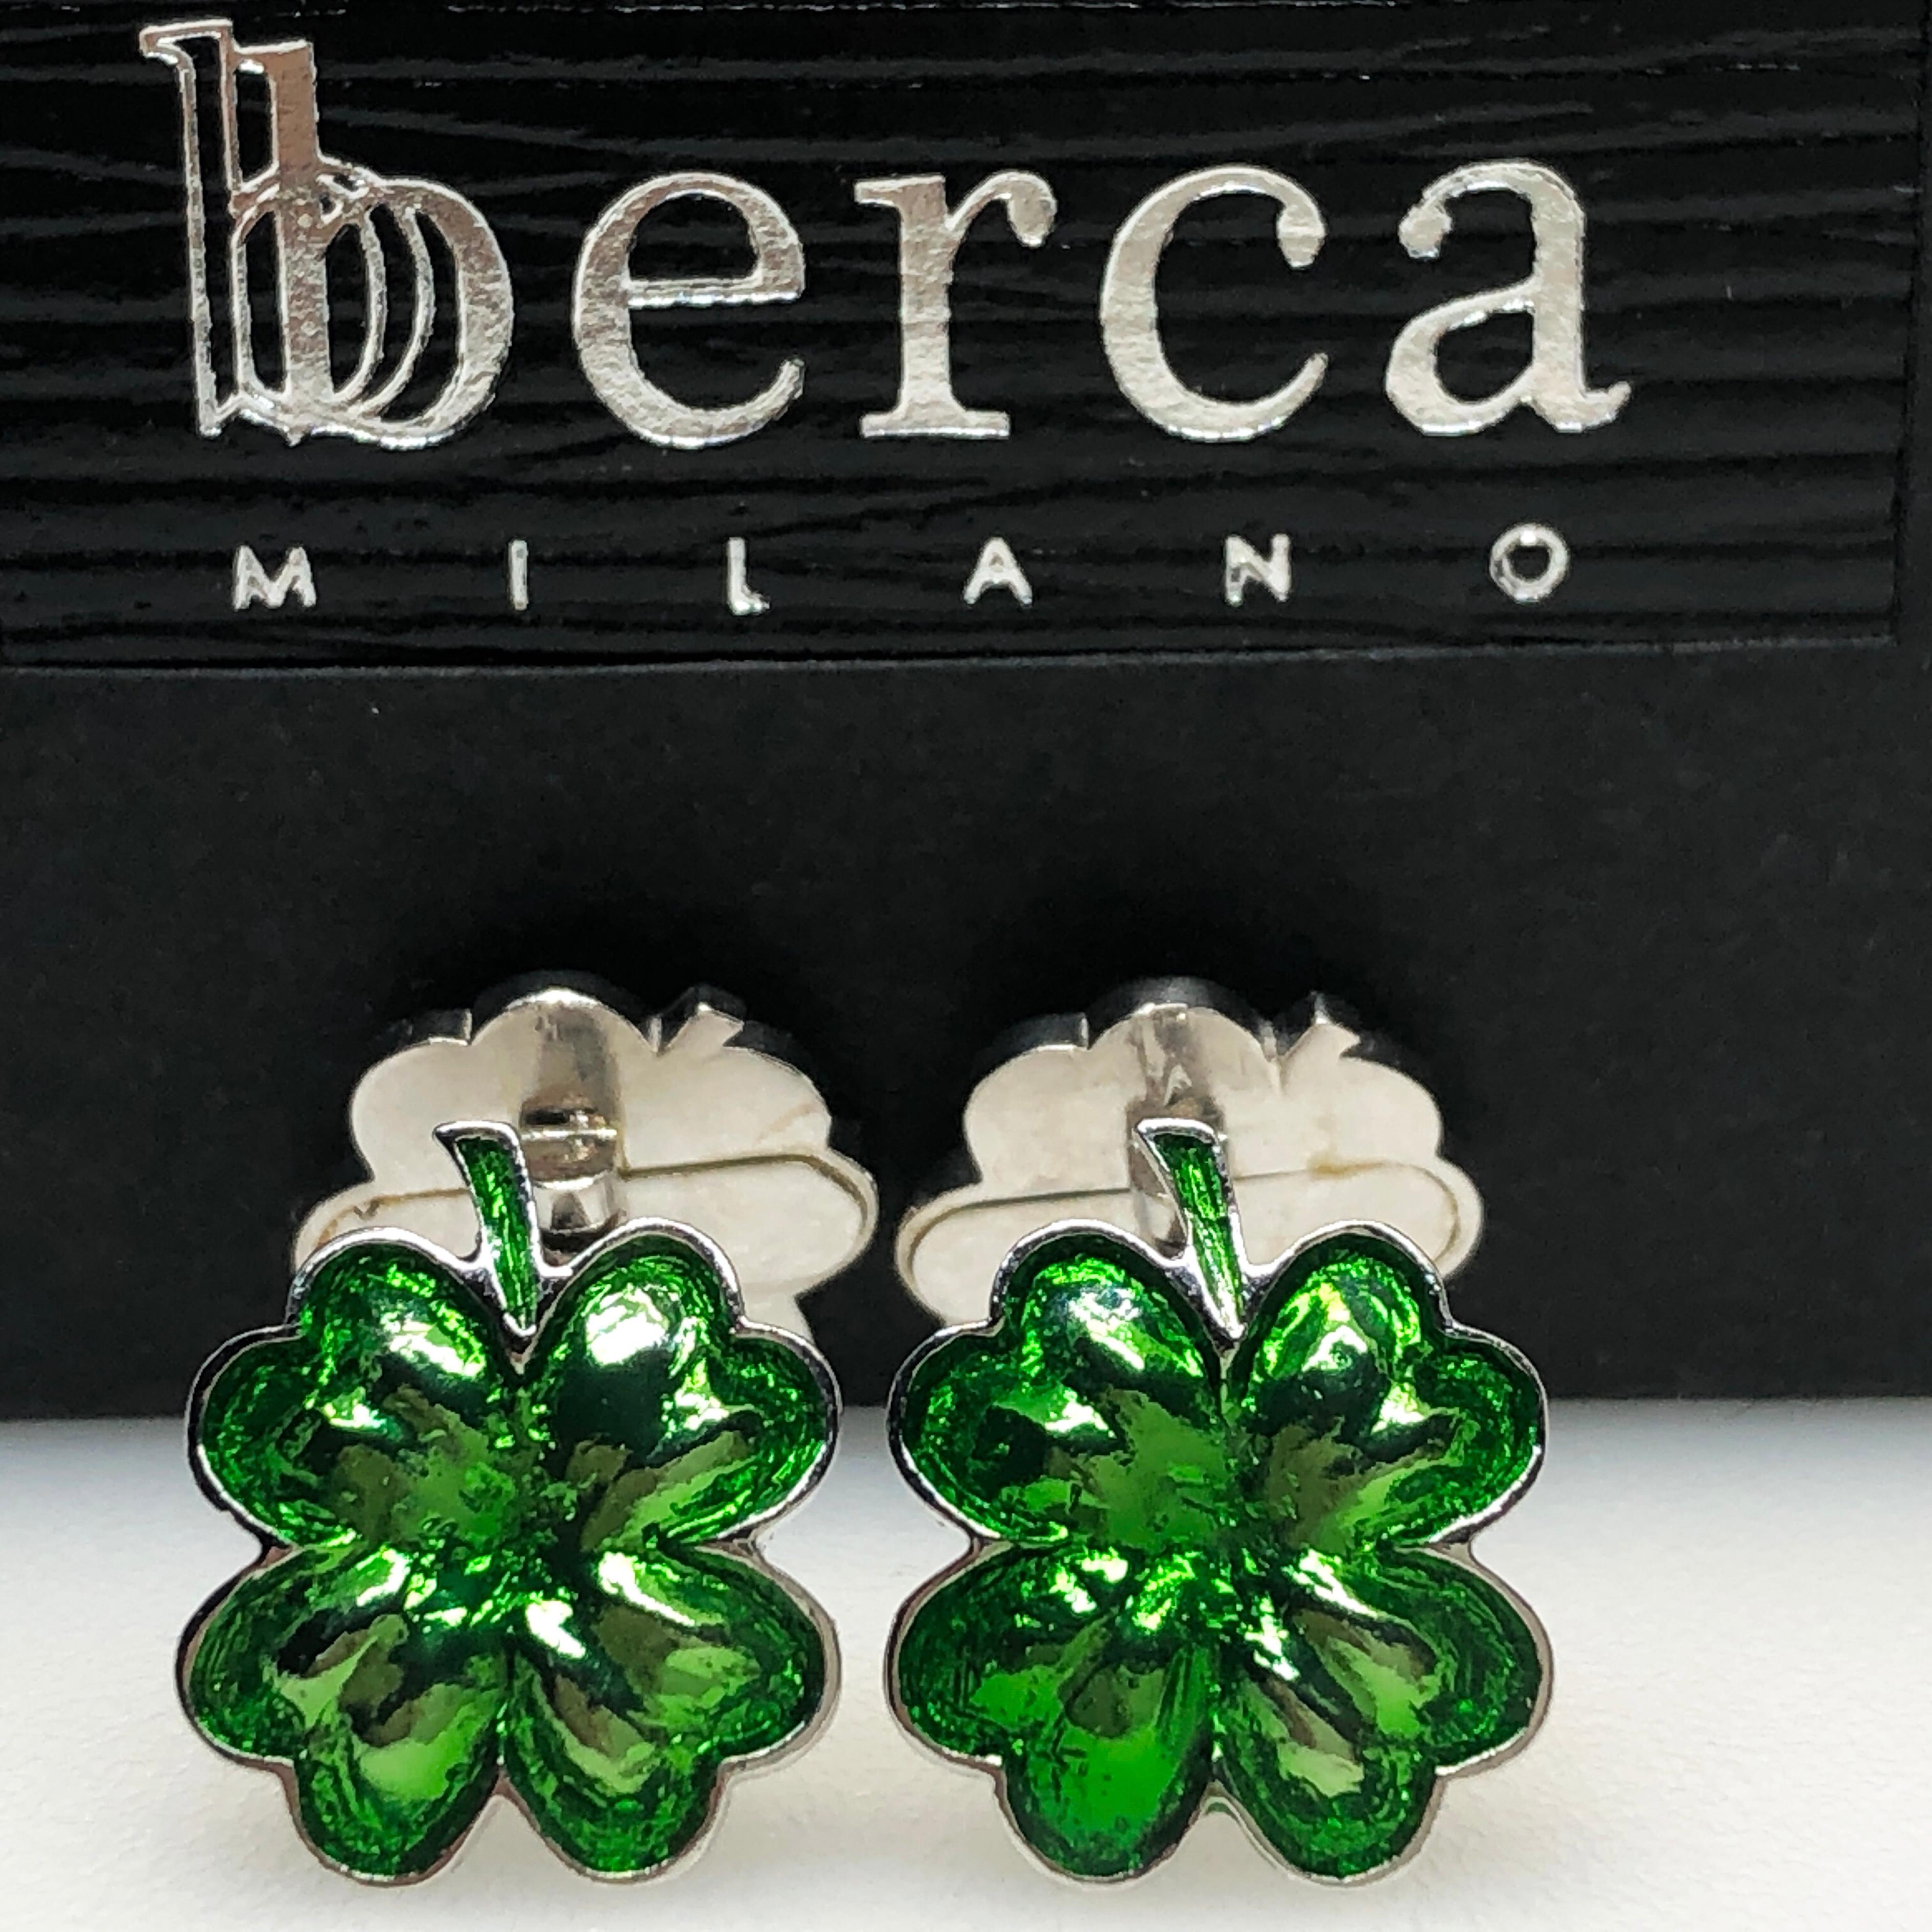 Unique, absolutely Chic Green Double Cloverleaf Hand Enamelled Sterling Silver Cufflinks.
In our smart Black Box and Pouch.
